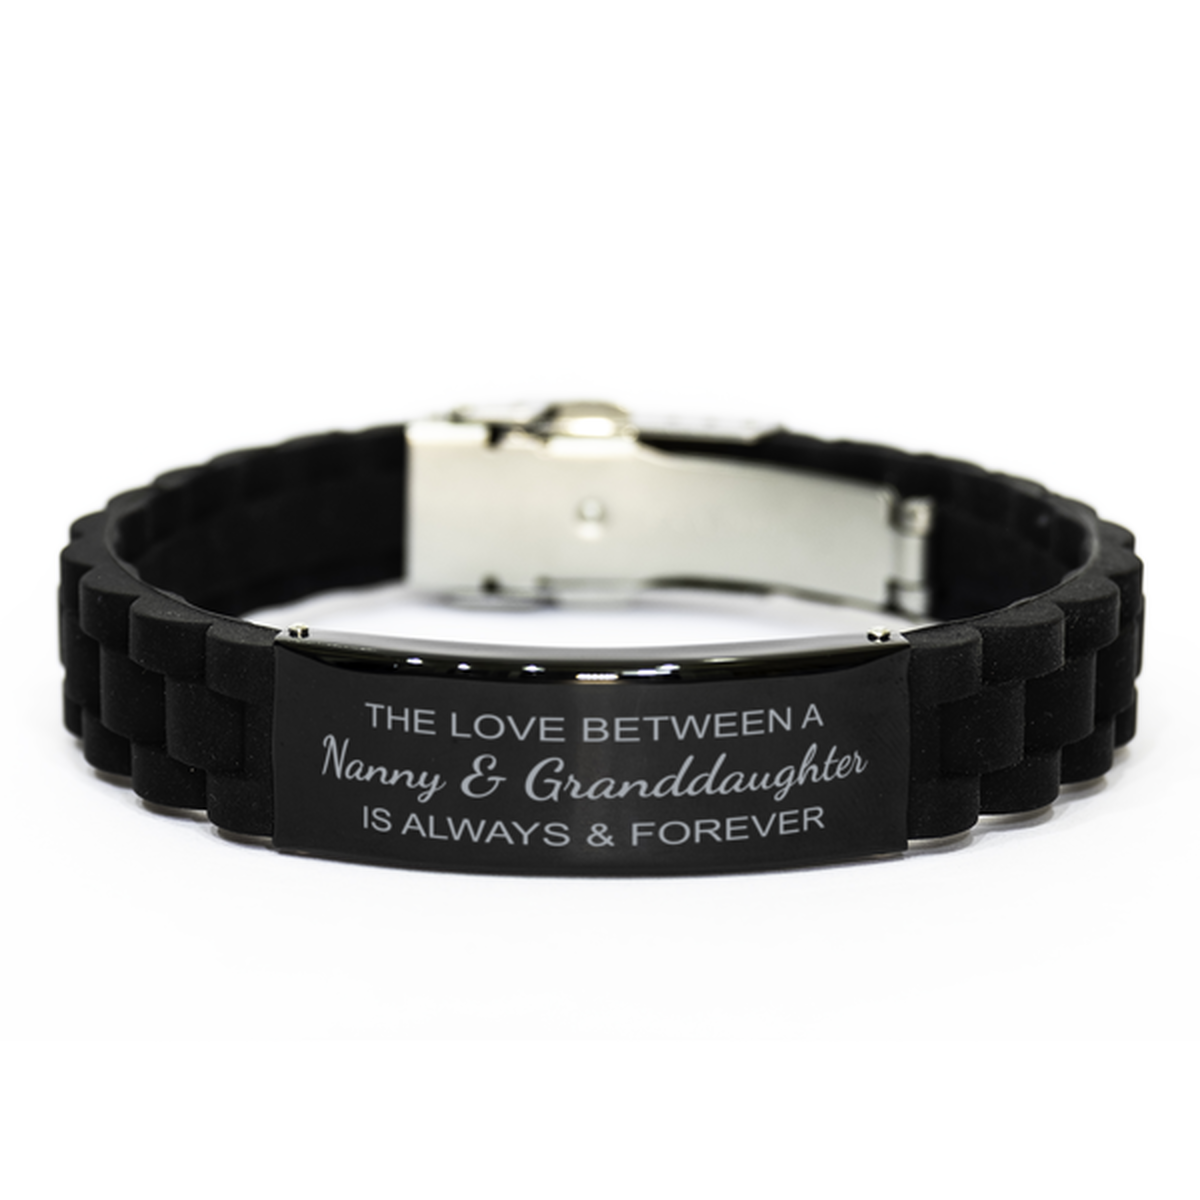 The Love Between a Nanny and Granddaughter is Always and Forever Bracelet, Nanny Granddaughter Bracelet, Black Stainless Steel Silicone Bracelet, Christmas.